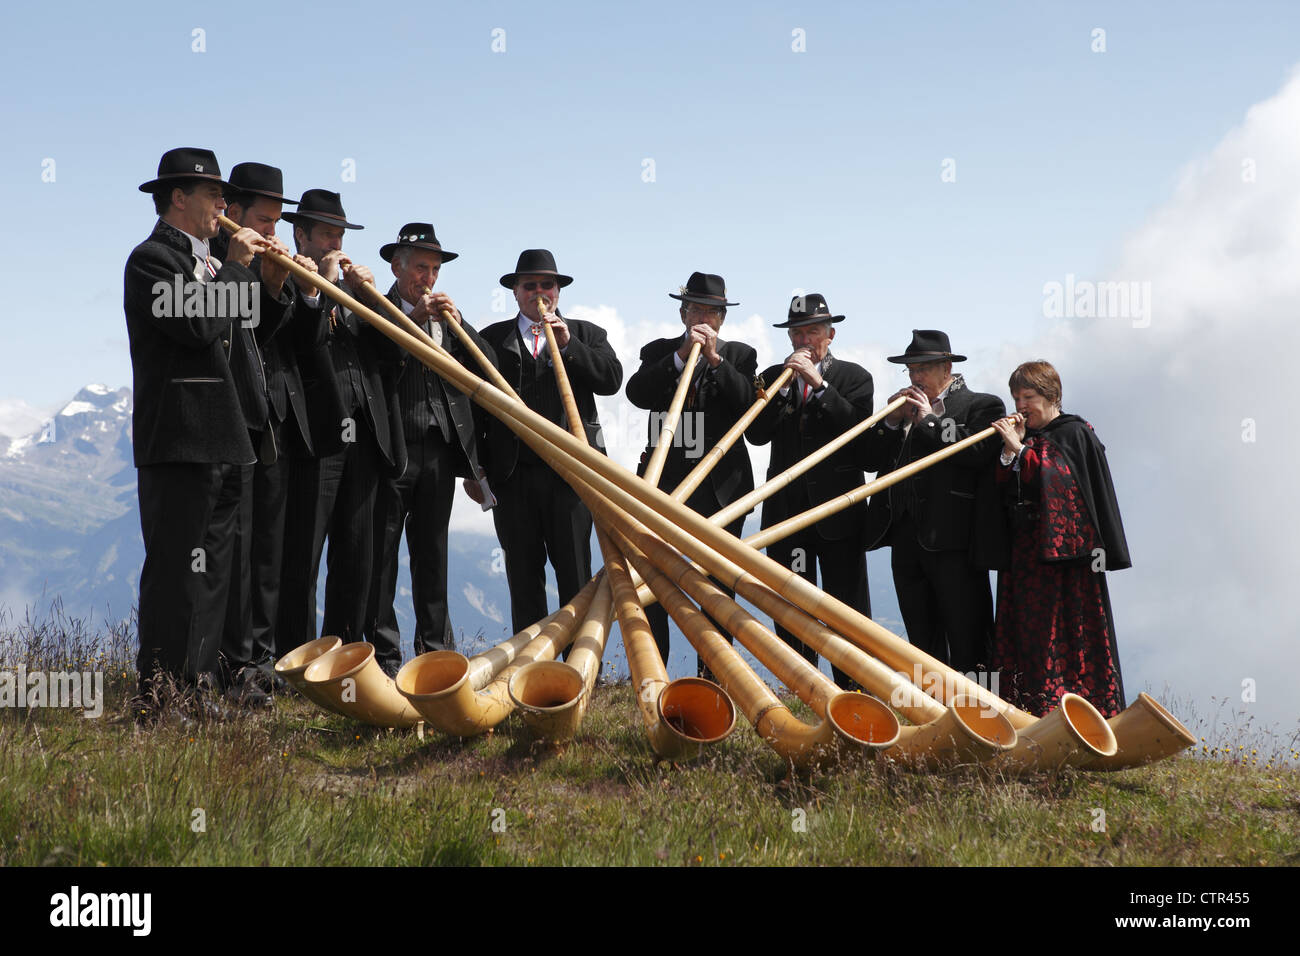 Alphorn players in traditional costume take part in the Cor des Alpes festival in the Alps of Nendaz, Valais, Switzerland Stock Photo